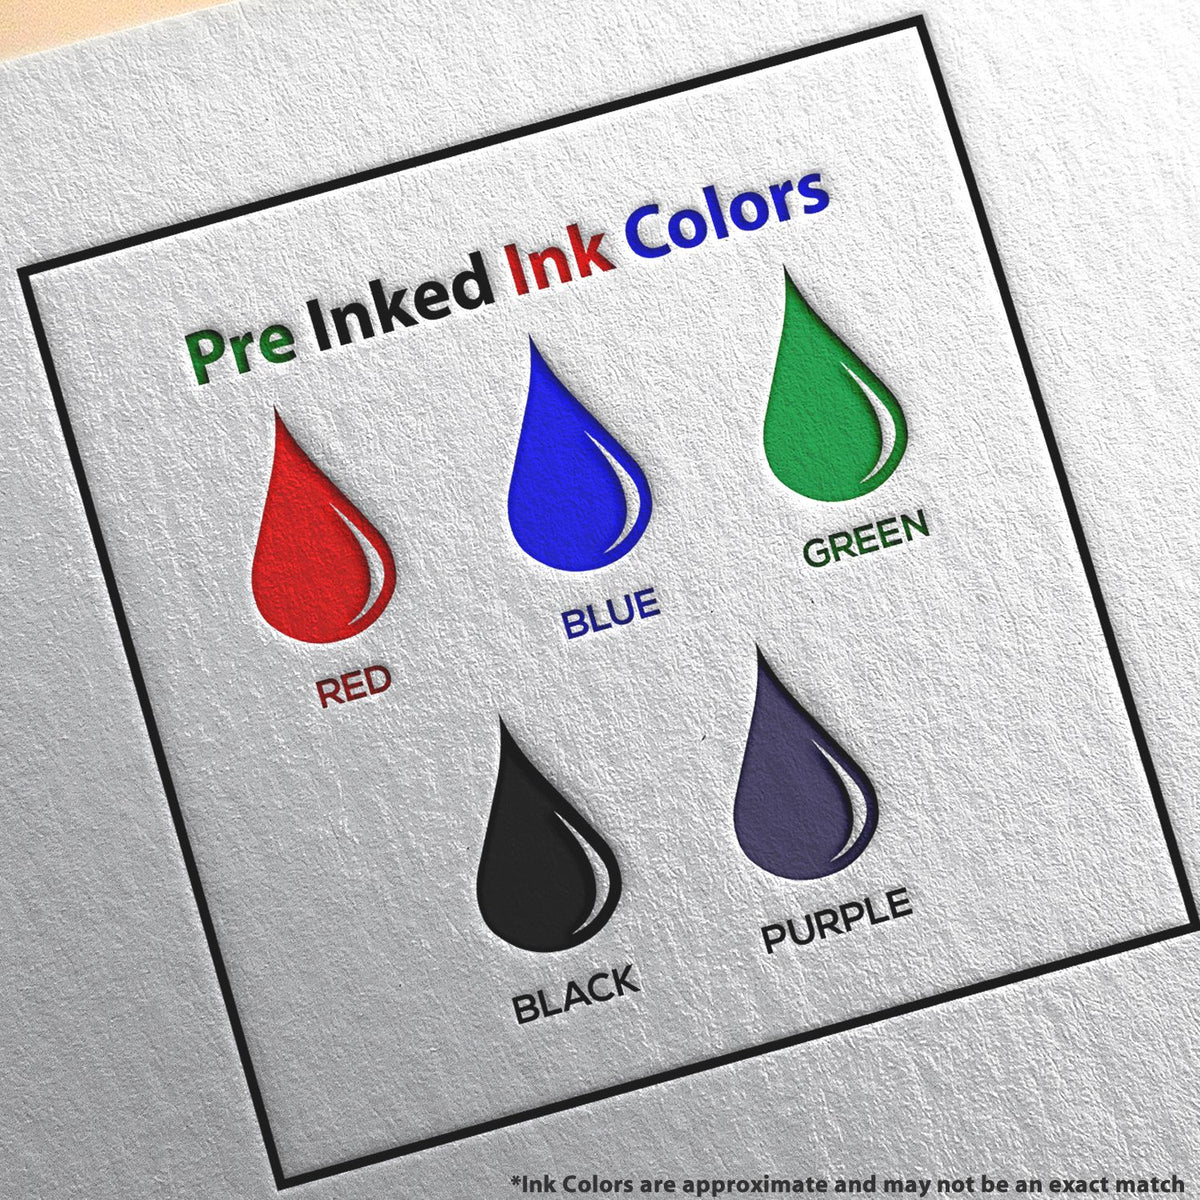 A picture showing the different ink colors or hues available for the Premium MaxLight Pre-Inked Iowa Engineering Stamp product.